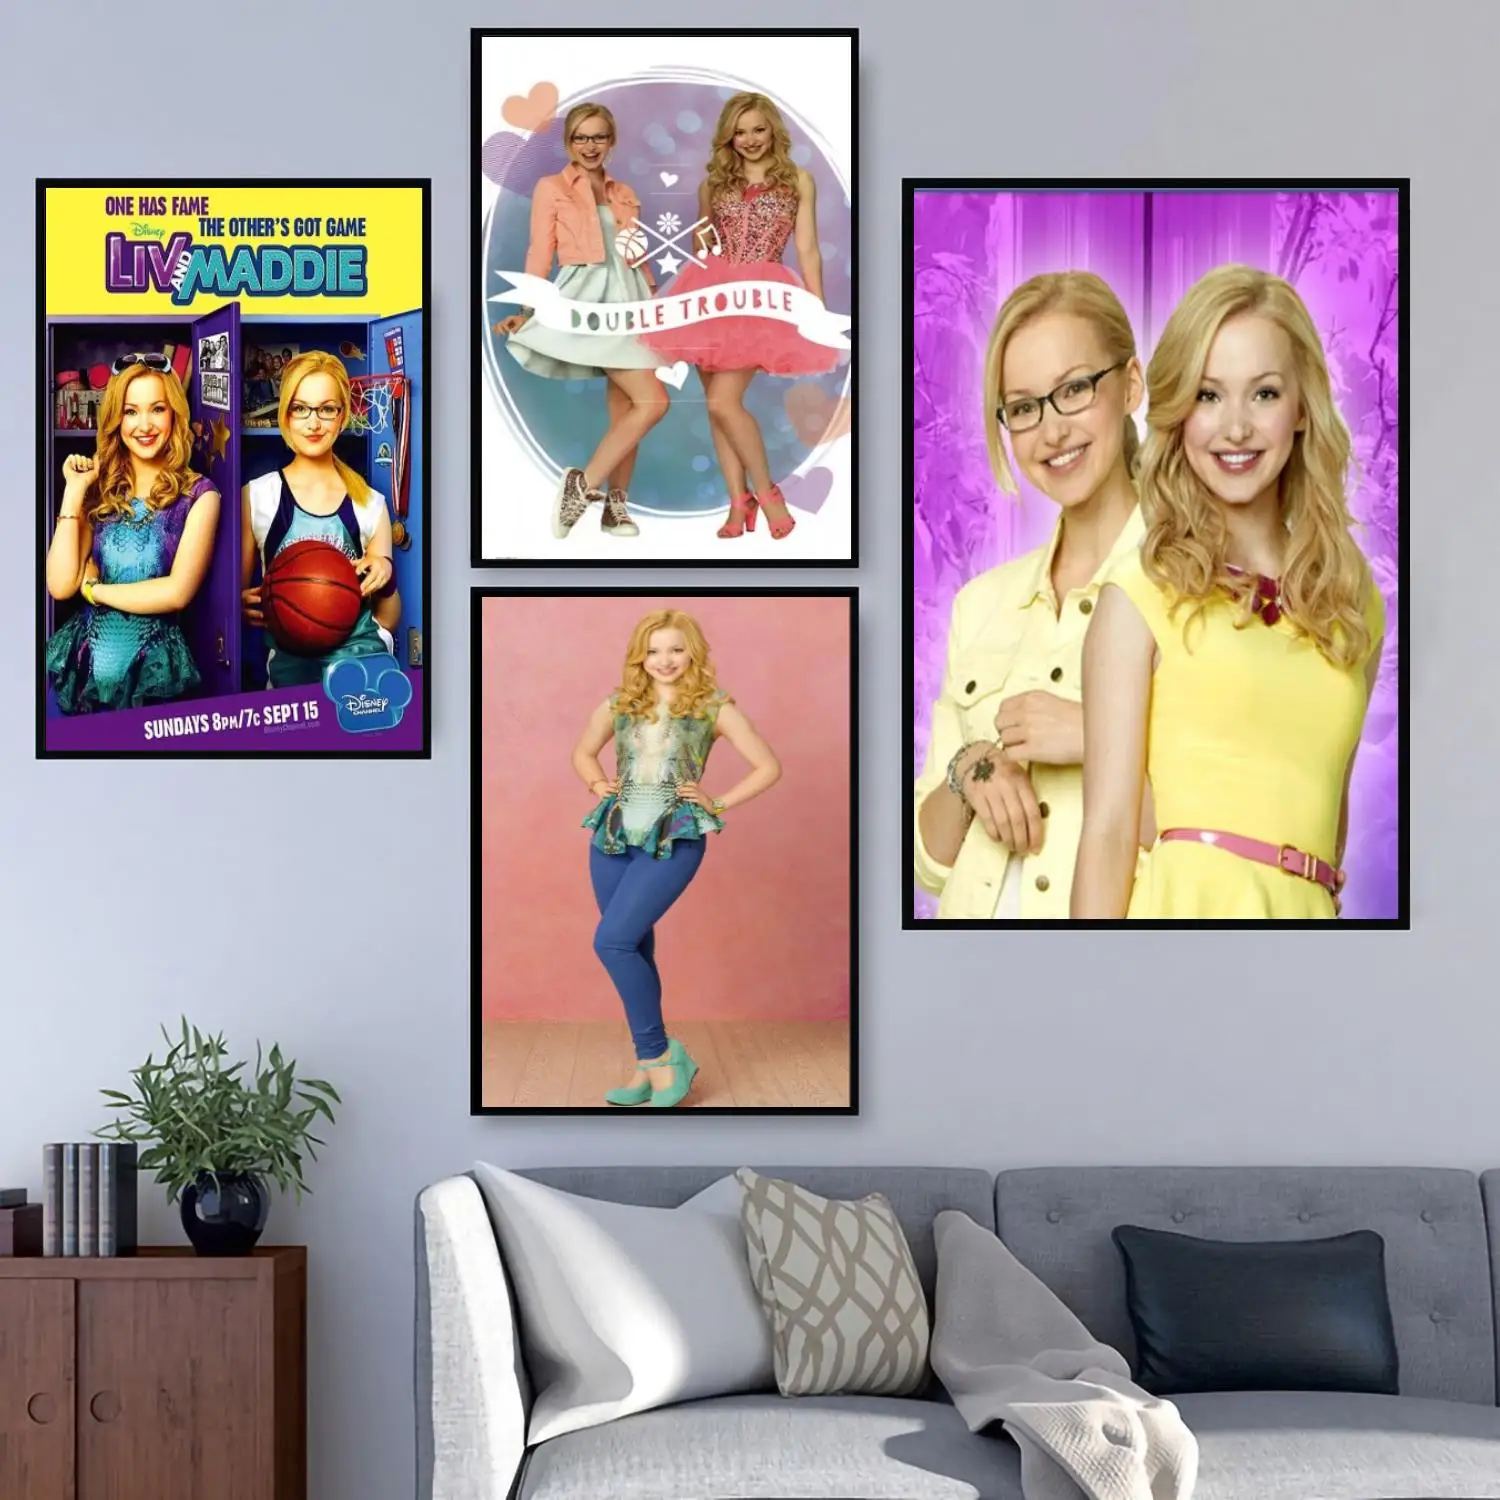 liv and maddie tv play 24x36 Decorative Canvas Posters Room Bar Cafe Decor Gift Print Art Wall Paintings